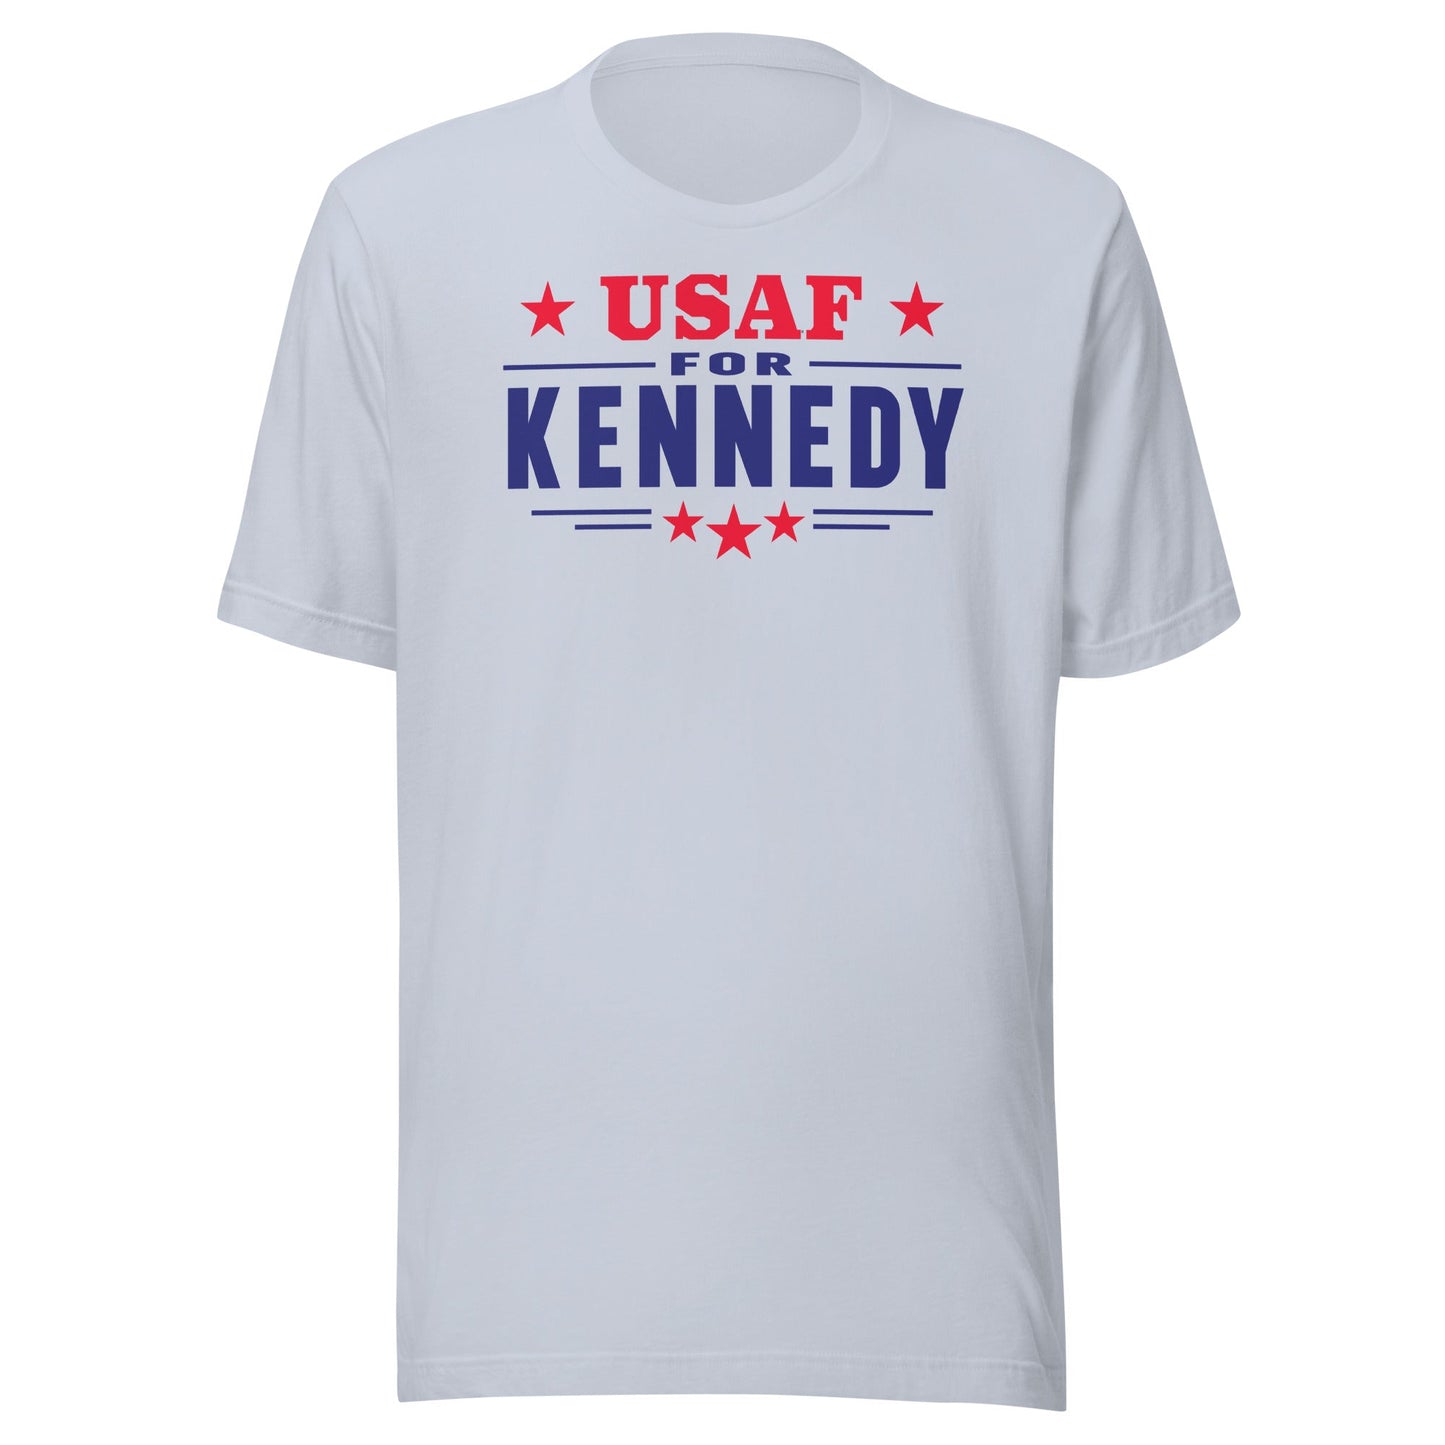 USAF for Kennedy Unisex Tee - TEAM KENNEDY. All rights reserved